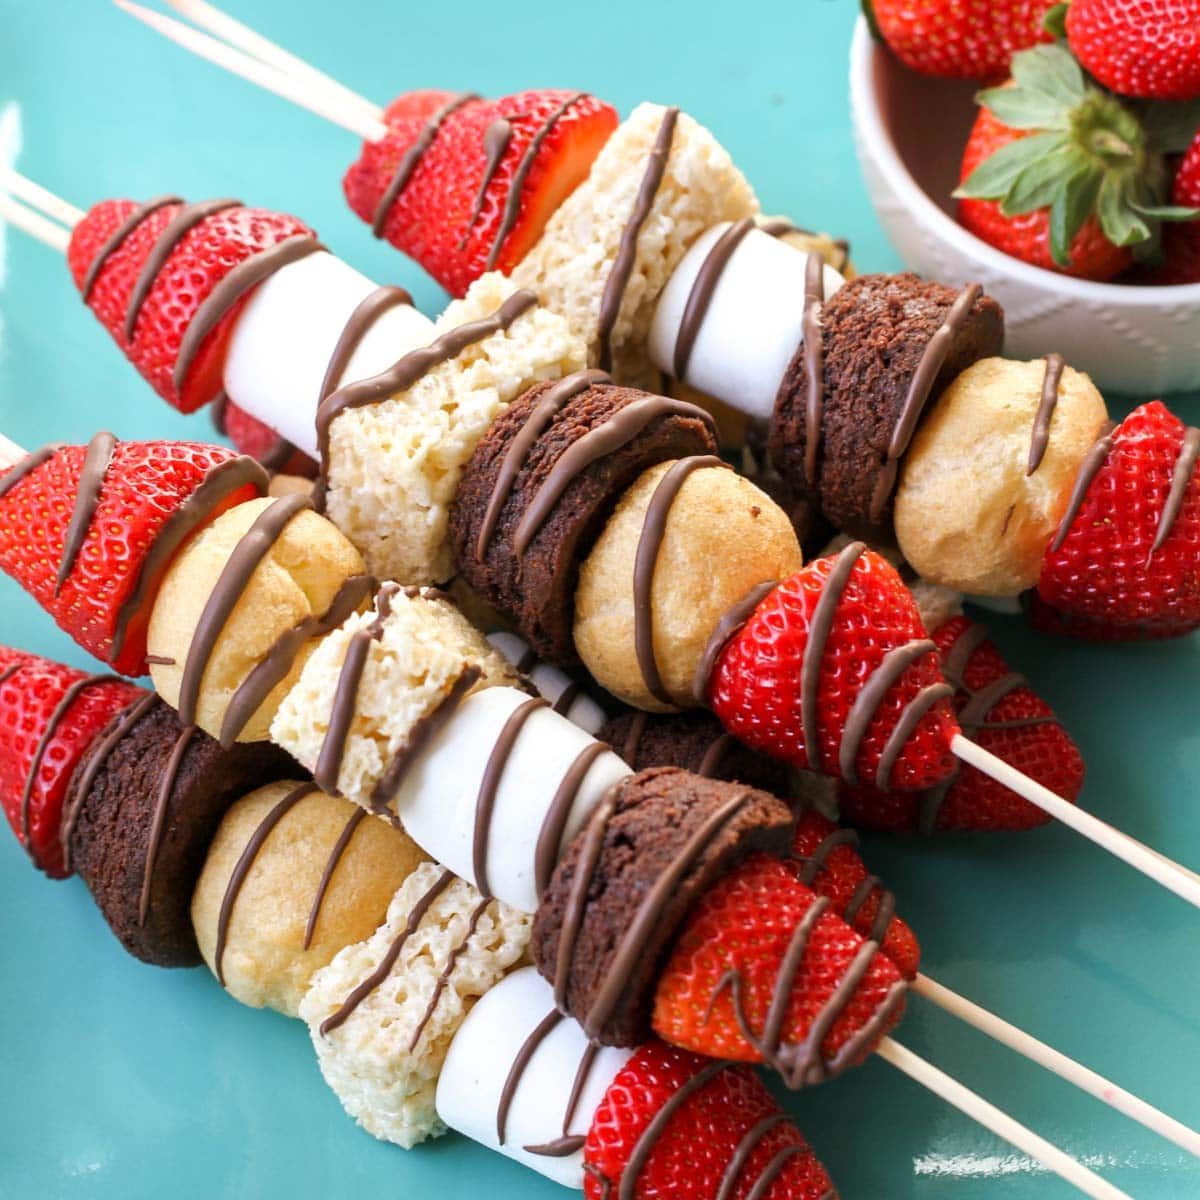 4th of July Desserts - Dessert kabobs made from brownie bites, cream puffs, marshmallows, and strawberries.